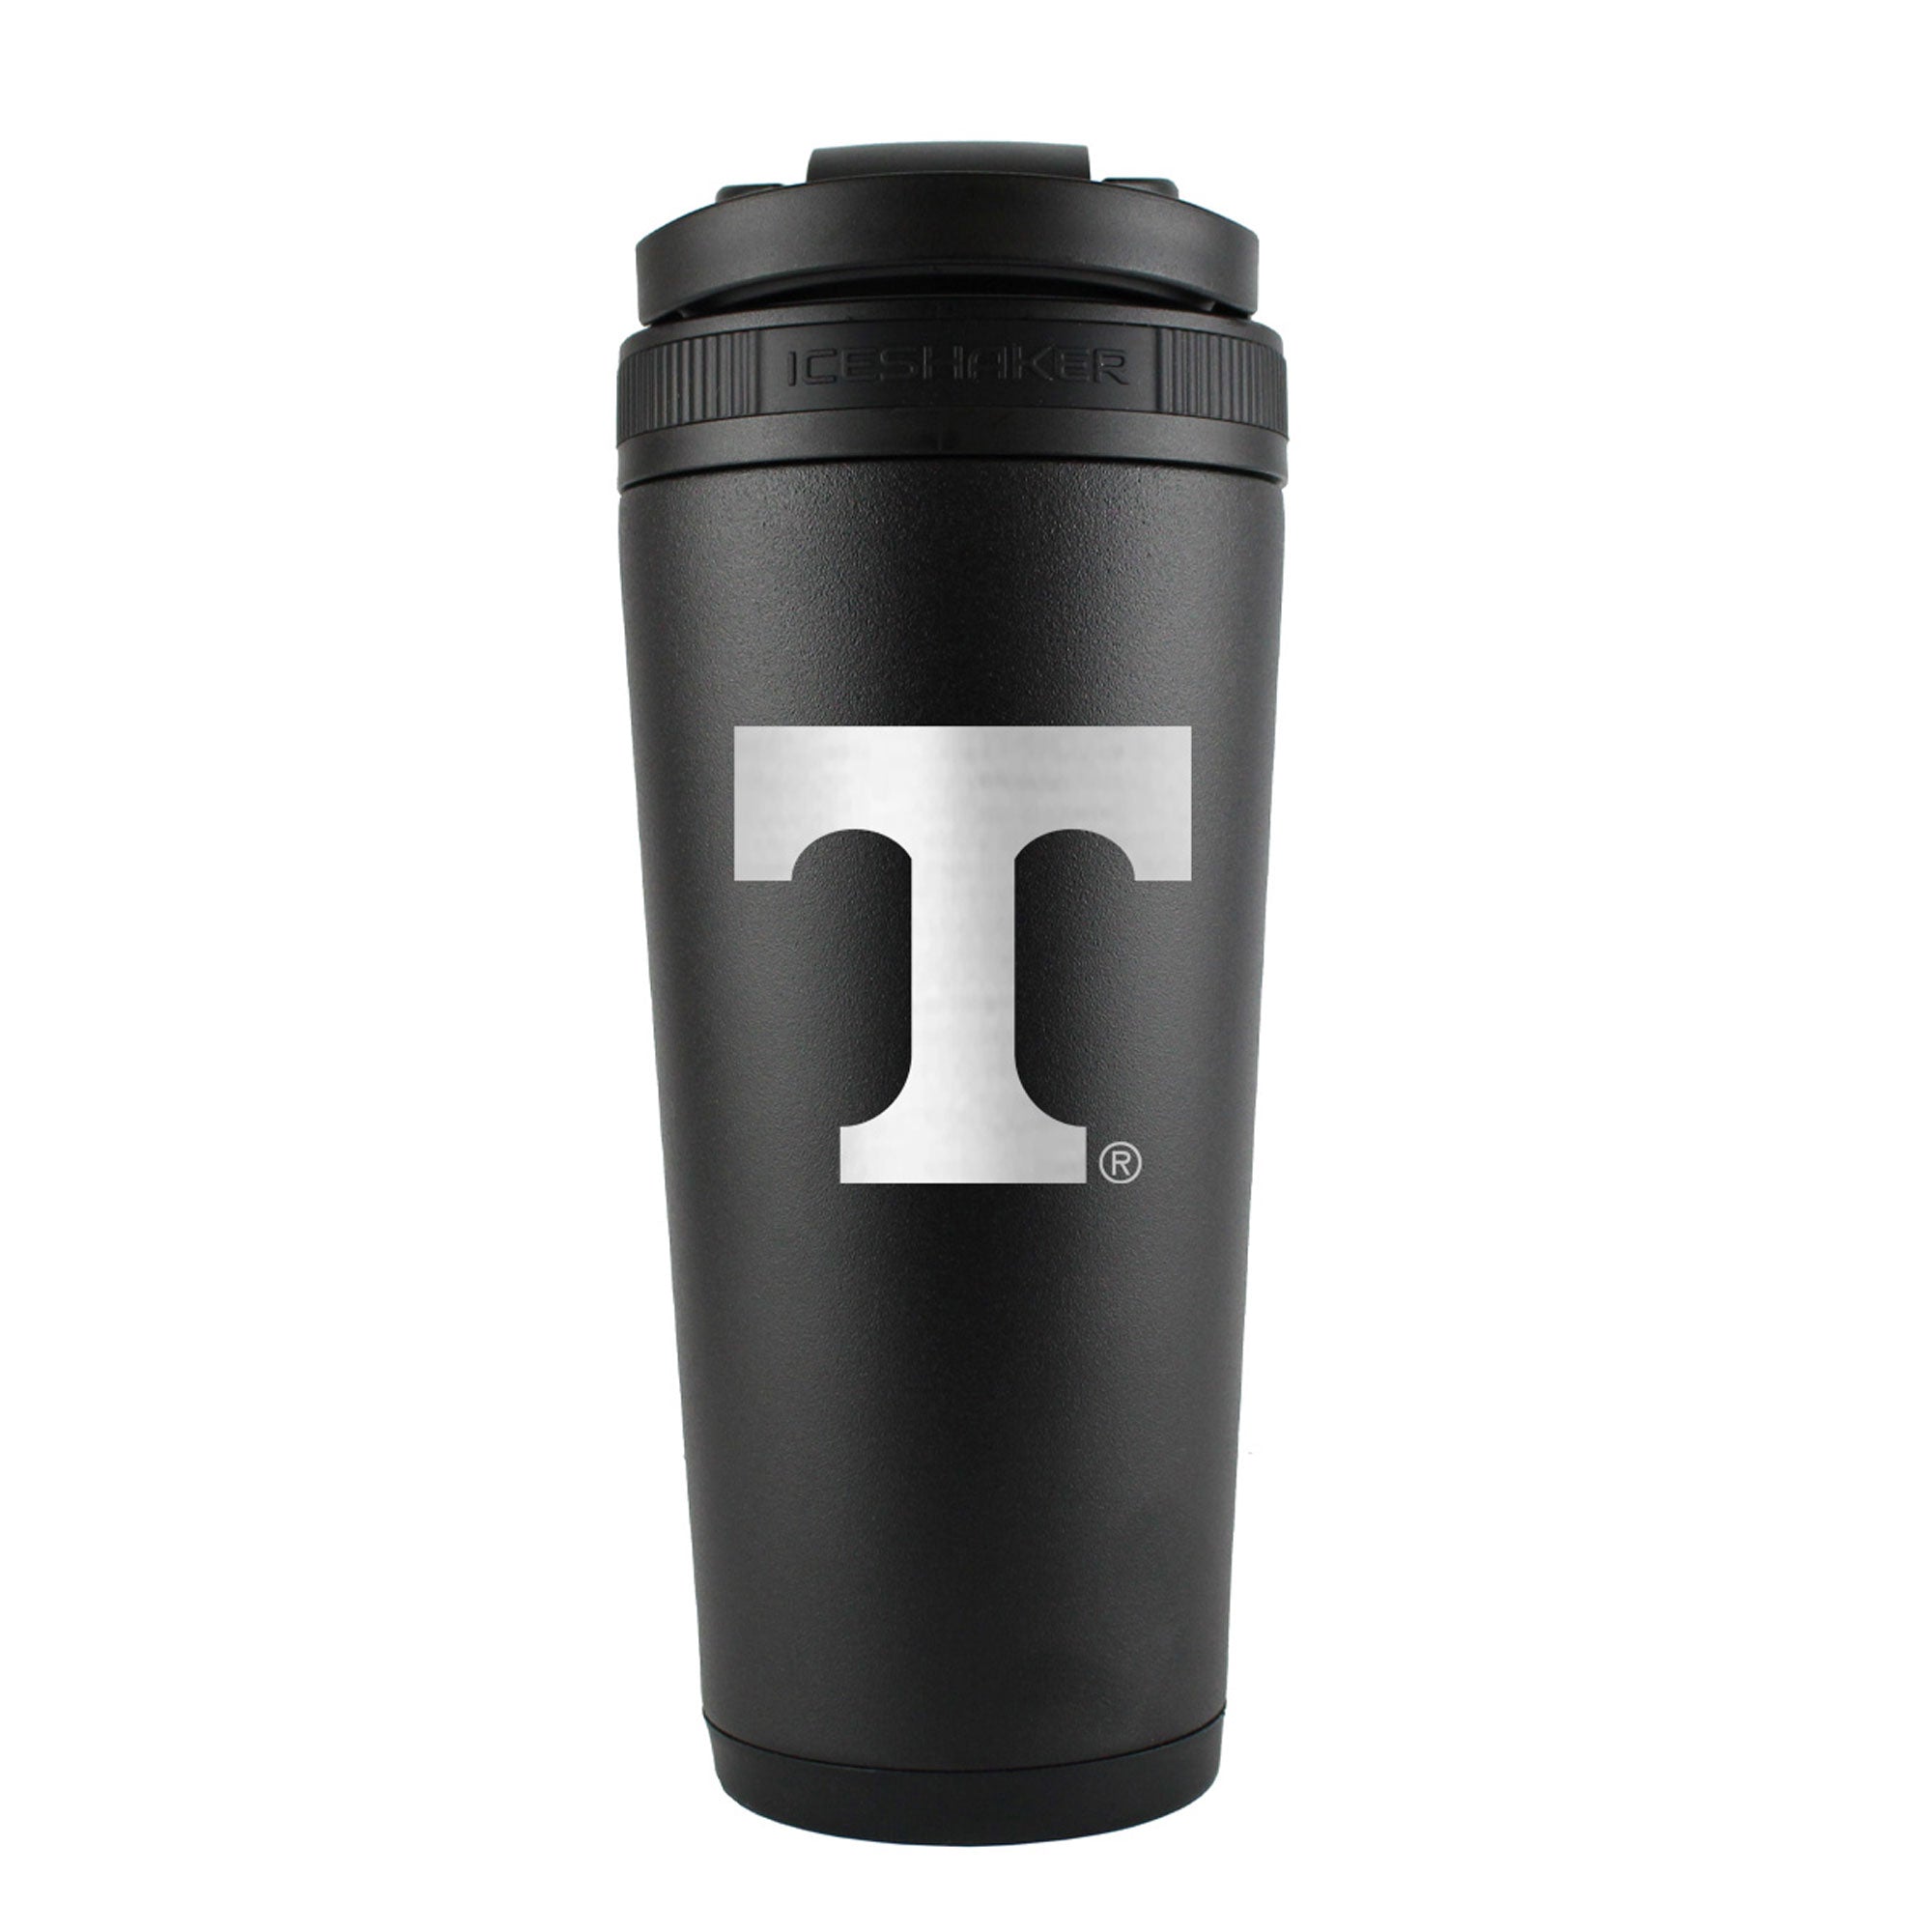 Officially Licensed University of Tennessee 26oz Ice Shaker